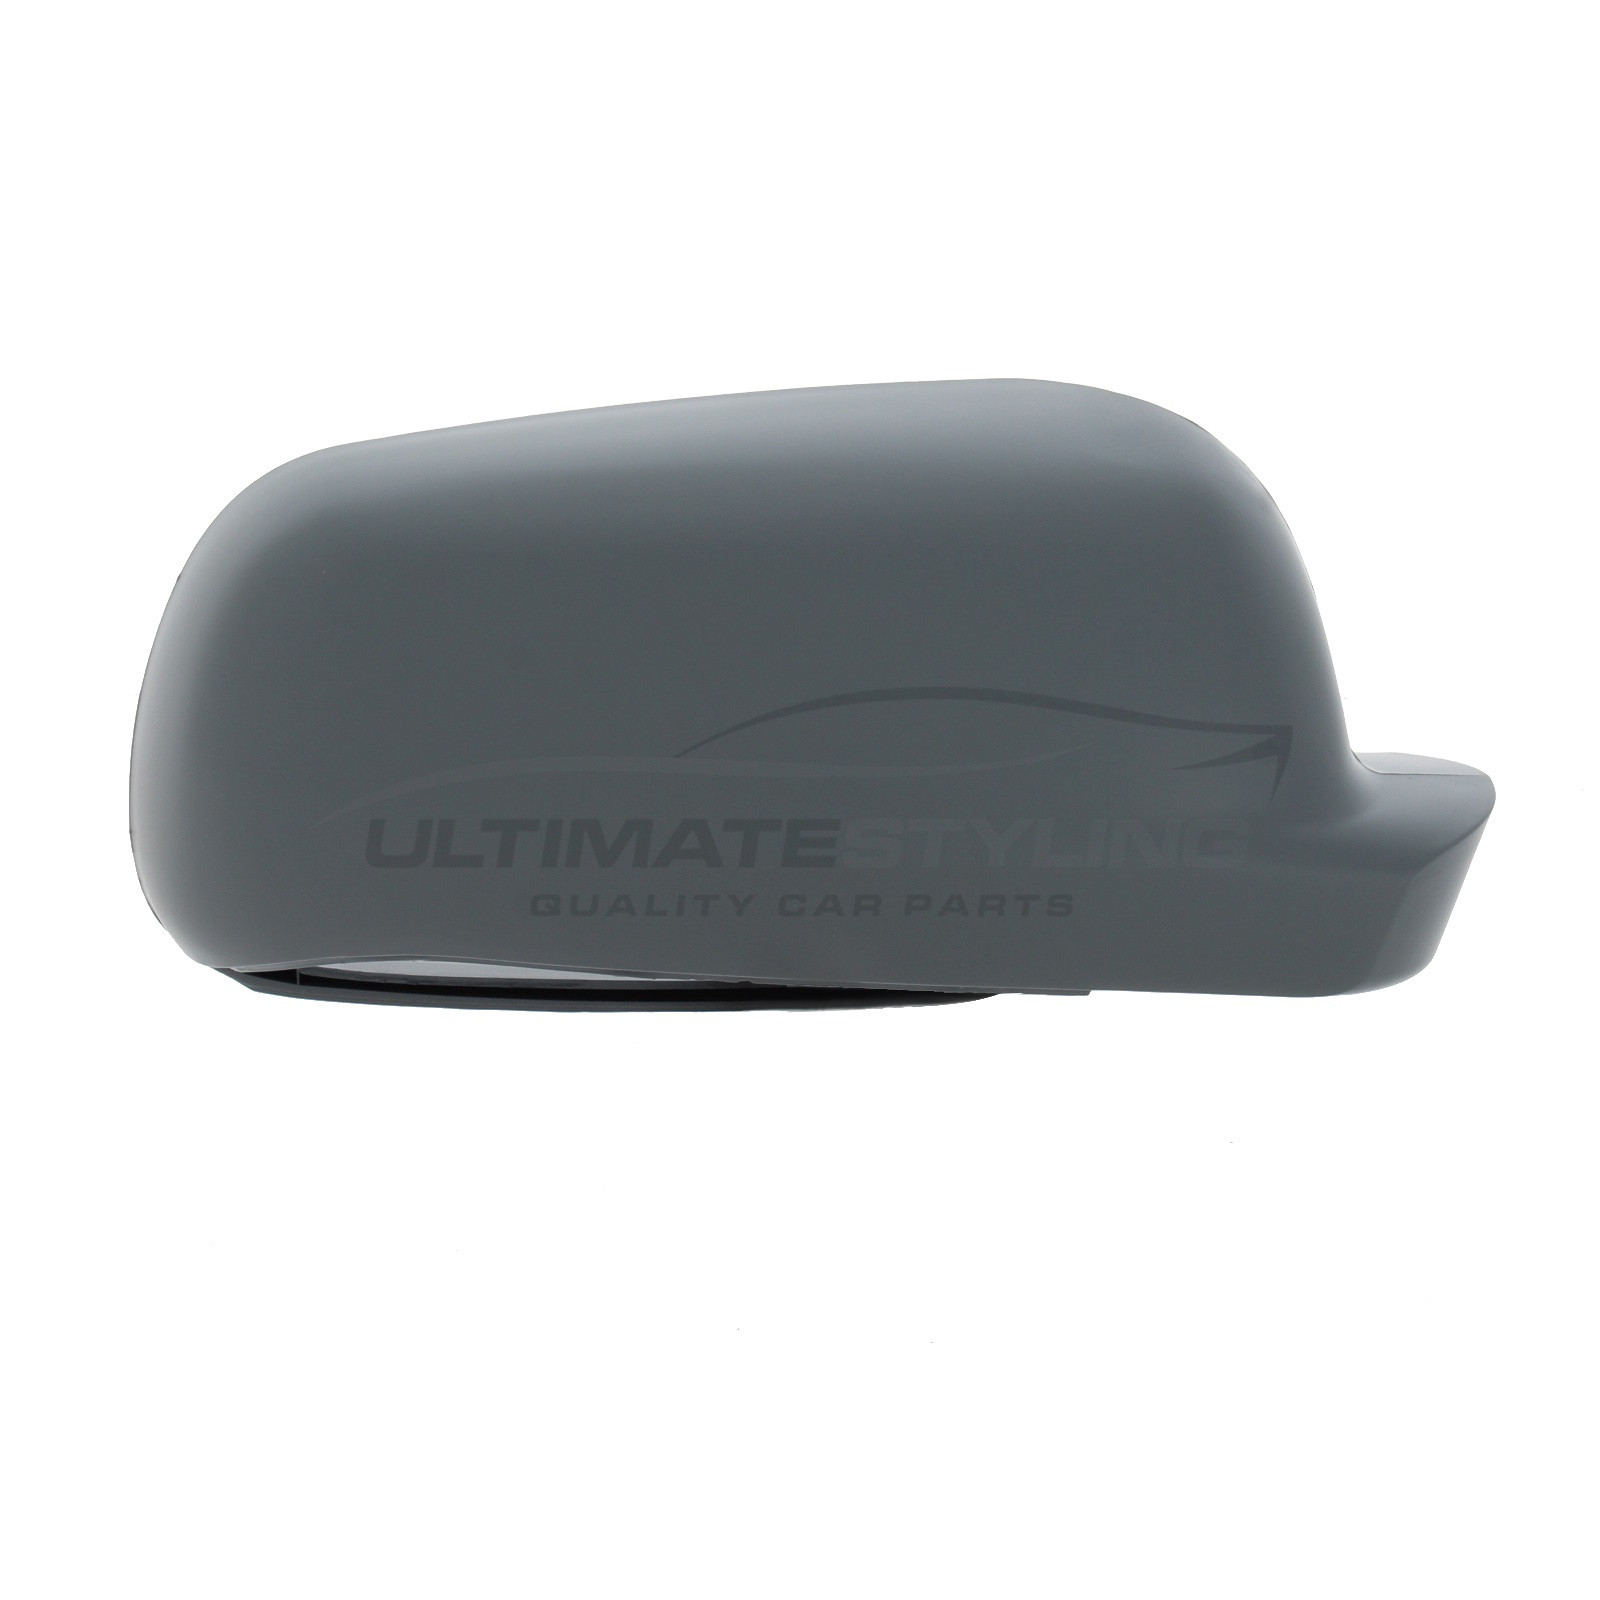 Seat Leon 2000-2005, Seat Toledo 1999-2005 Wing Mirror Cover Cap Casing Primed Drivers Side (RH)